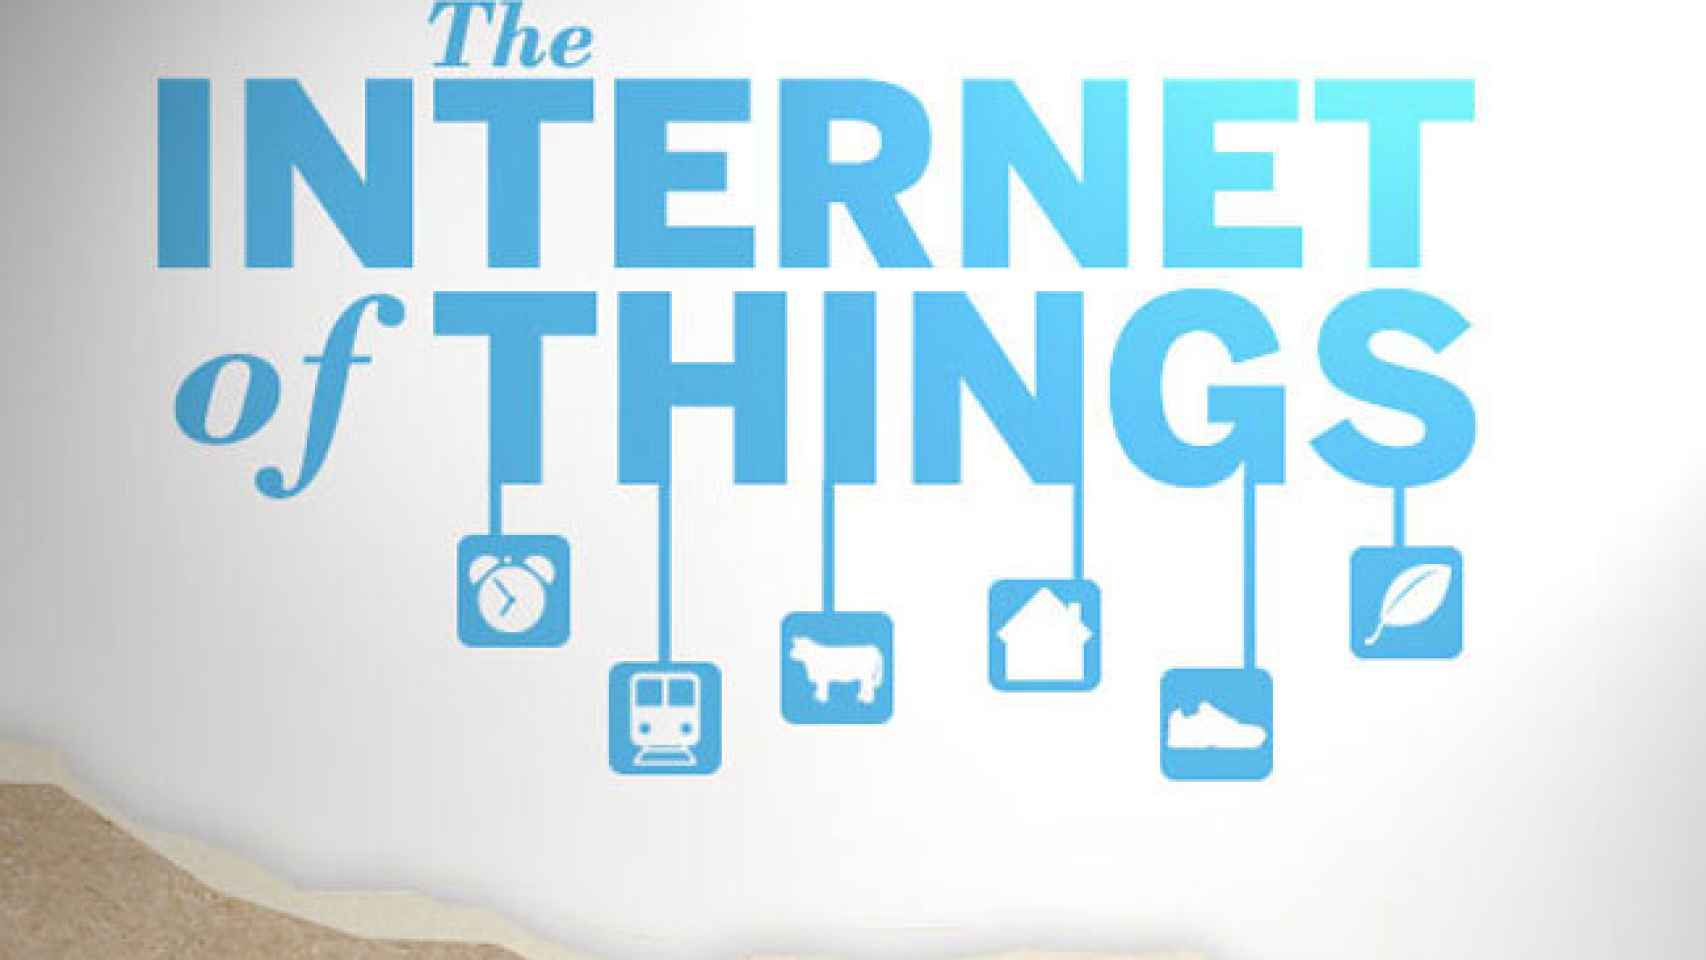 The-Internet-of-Things-cisco-csco-stock